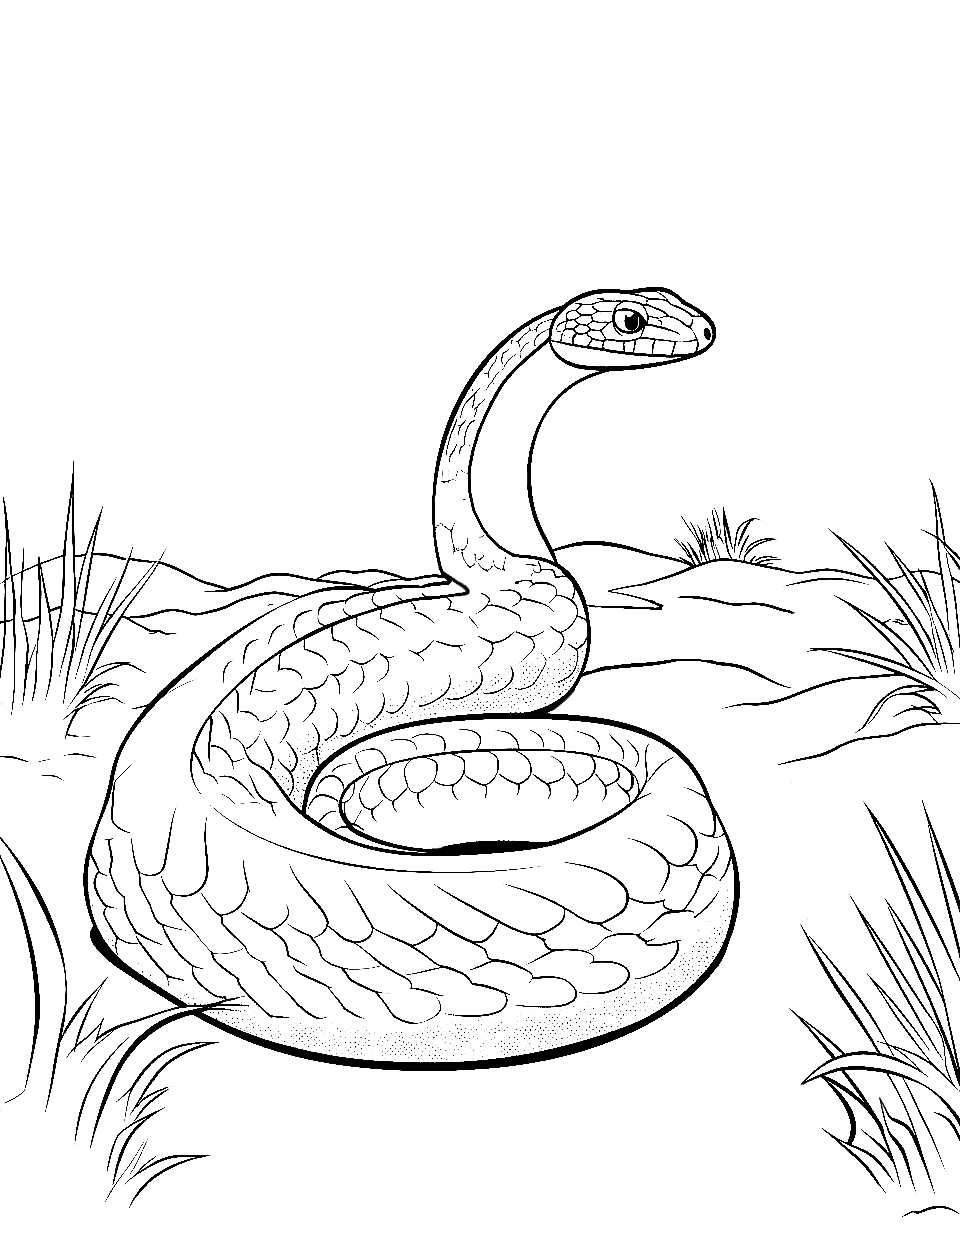 Adder in the Sand Coloring Page - An adder snake blending with sandy dunes.